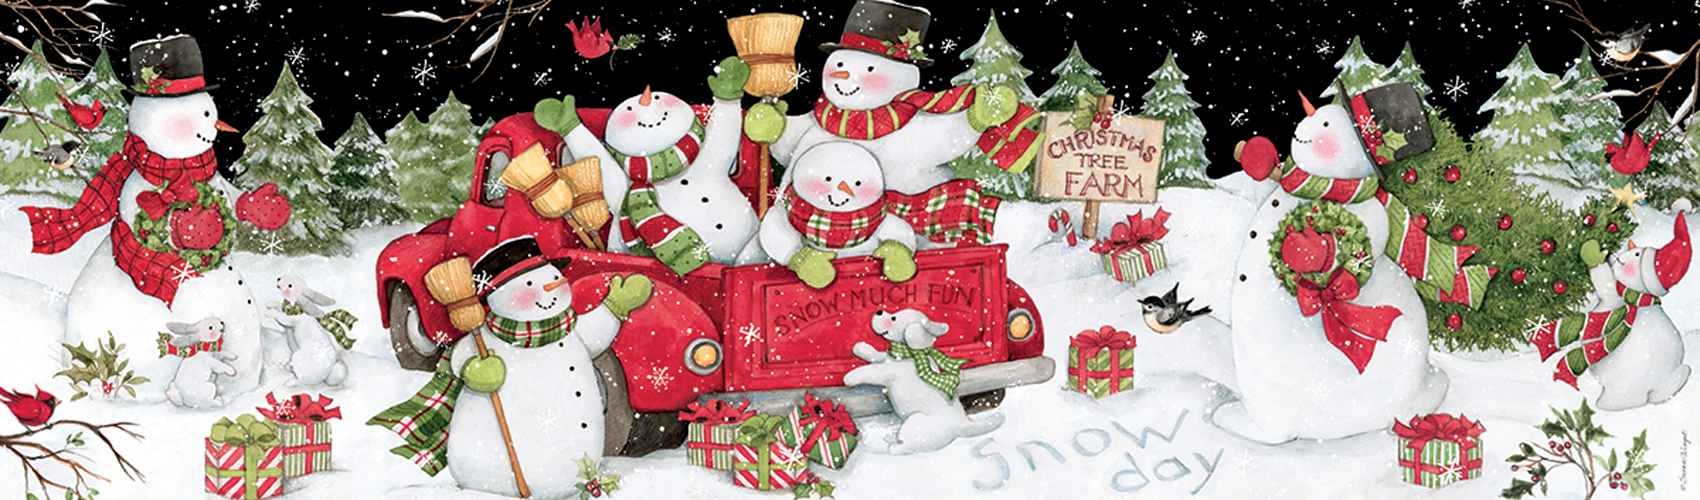 Snow Day Christmas Jigsaw Puzzle